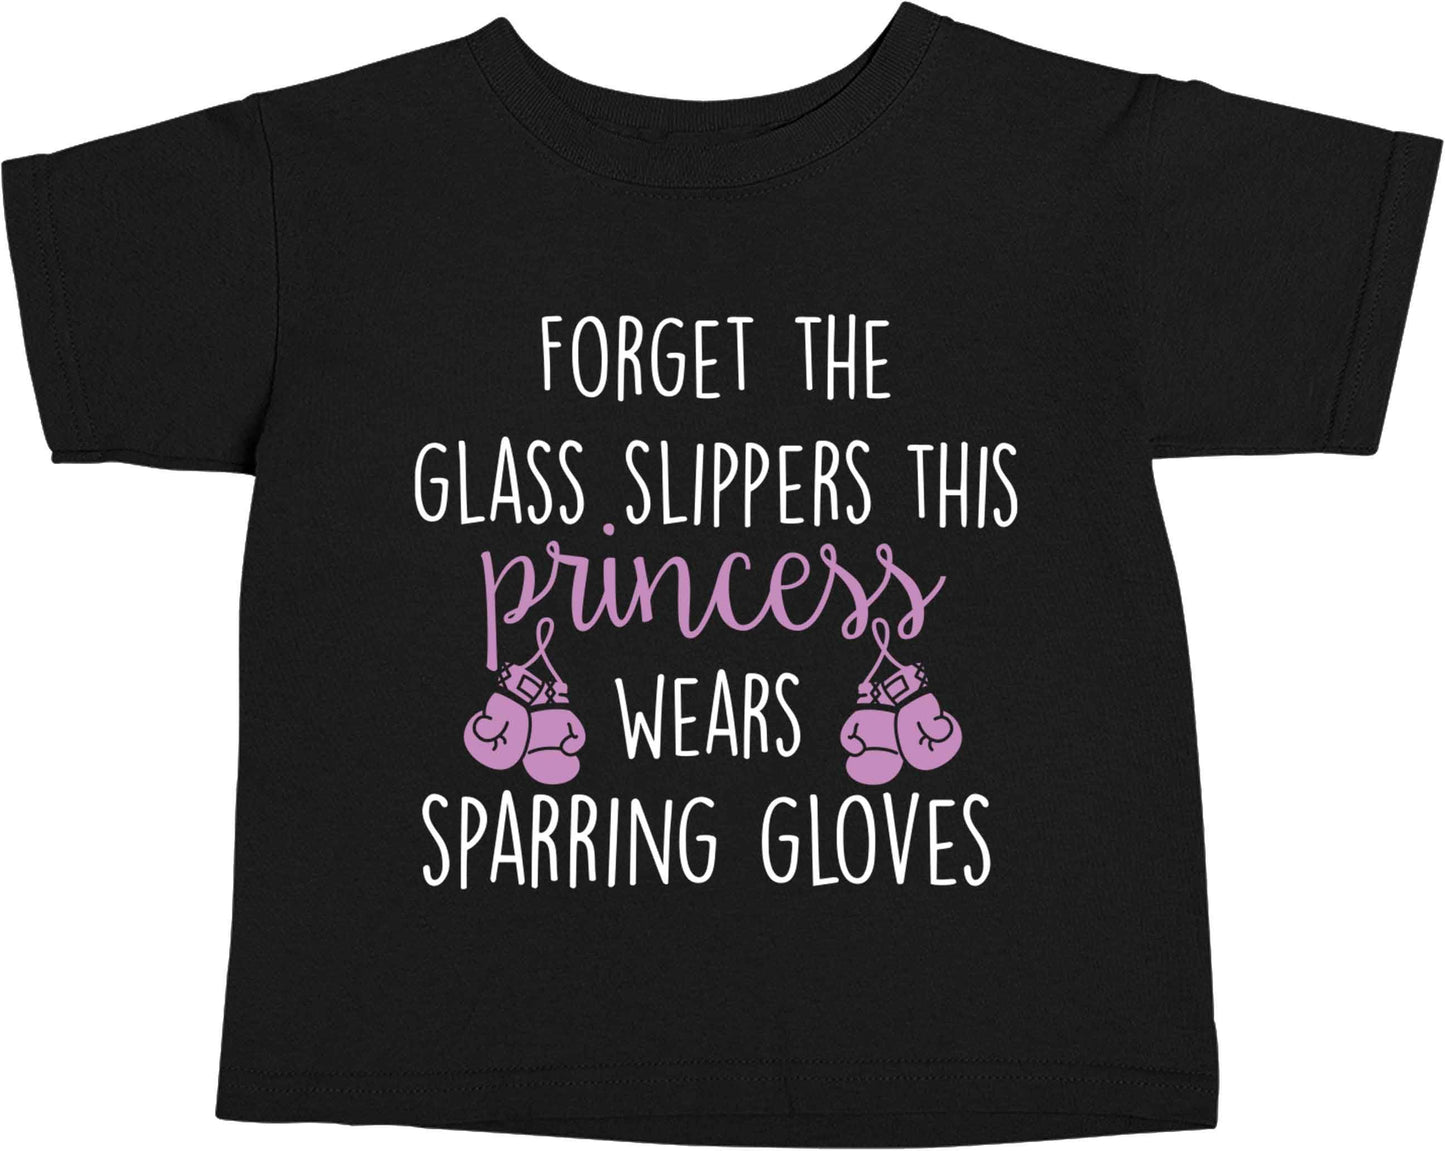 Forget the glass slippers this princess wears sparring gloves Black baby toddler Tshirt 2 years